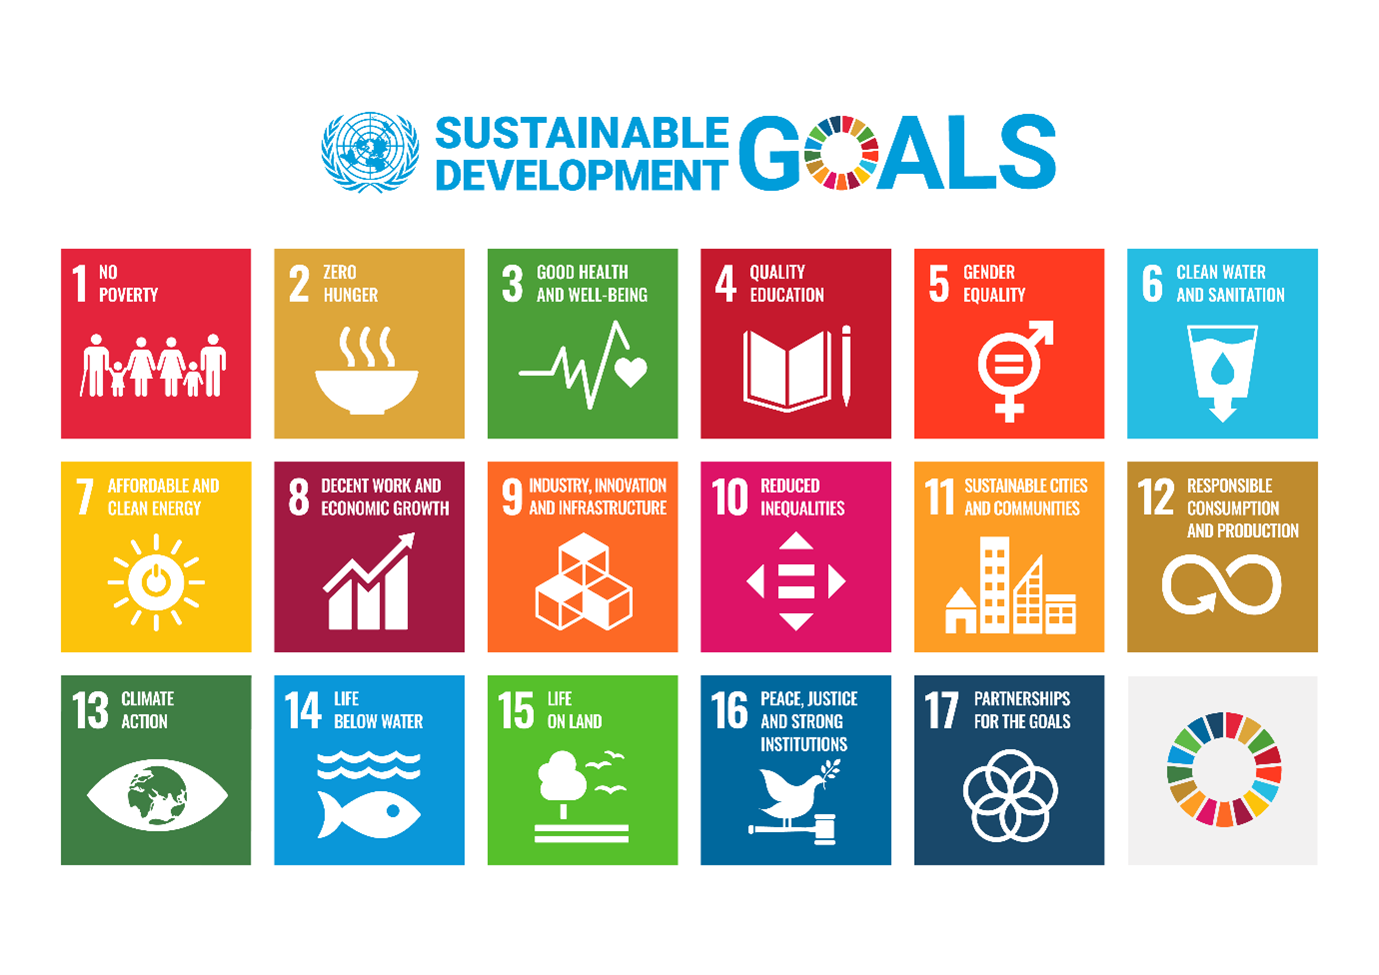 United Nations Sustainable Development Goals chart. For a full list of the 17 goals, click on "Image Details" 